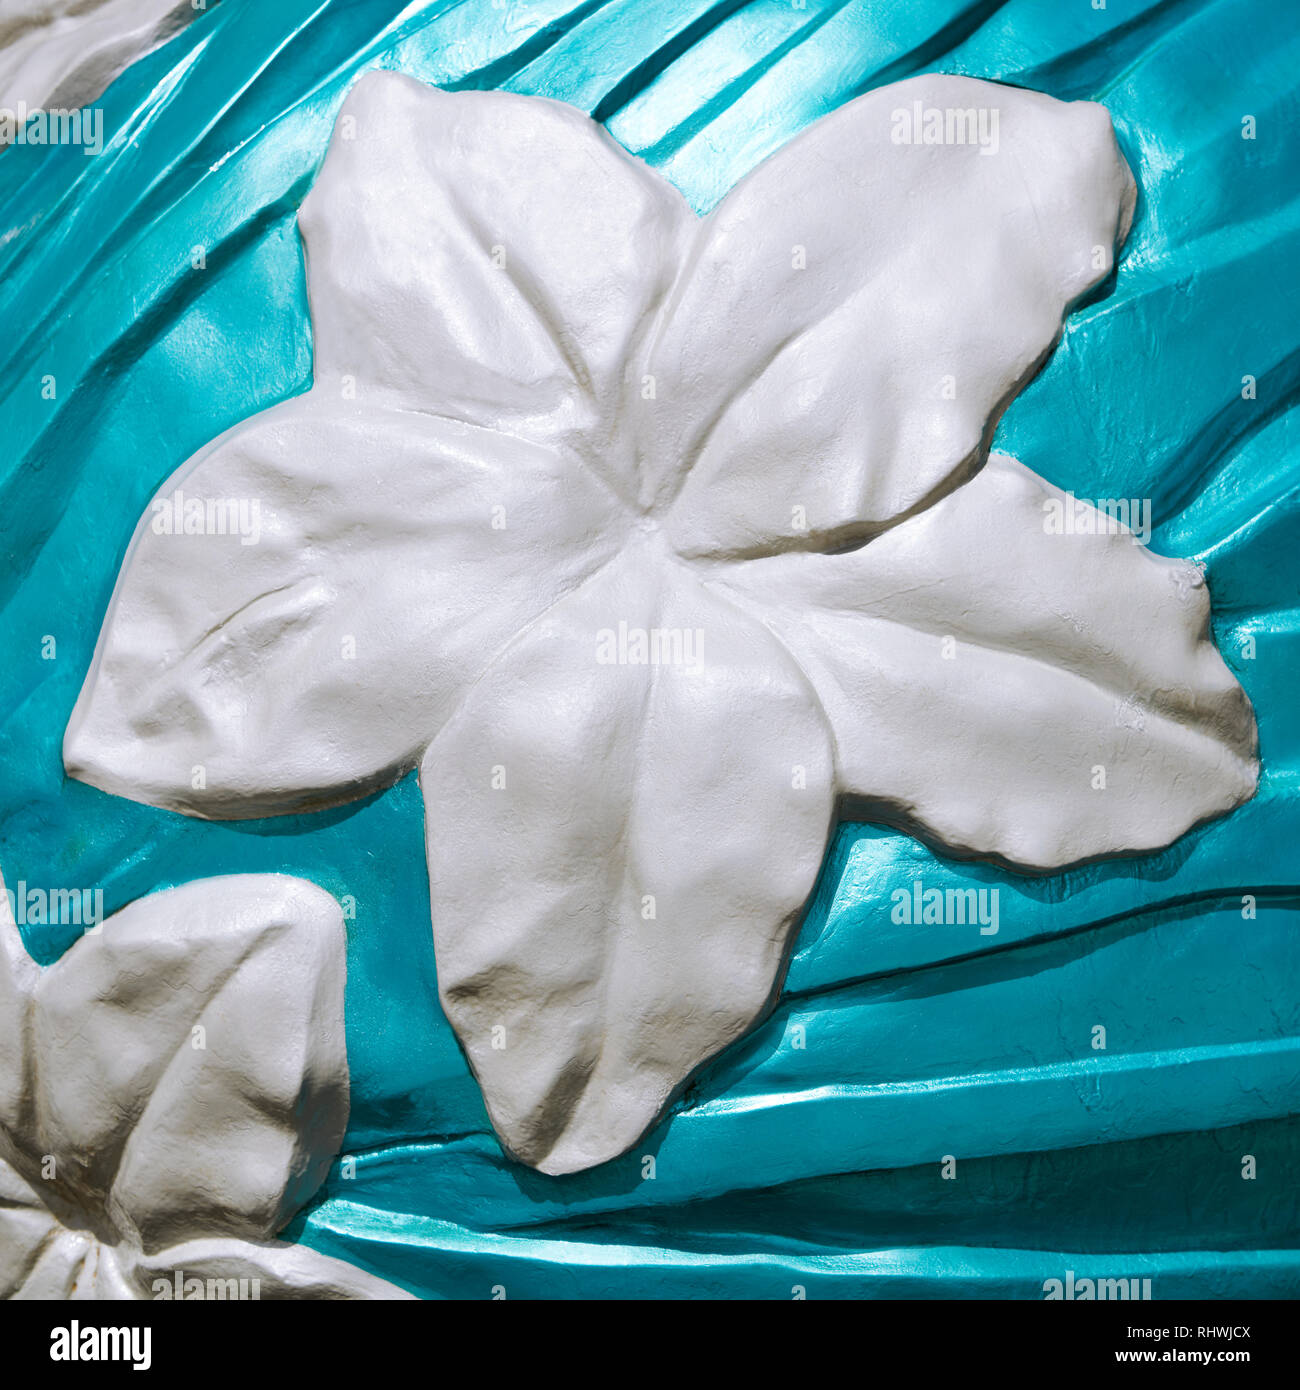 Asian style white orchid flower, sculptured from concrete, surrounded by an aqua colored painted background. It has a square format. Stock Photo